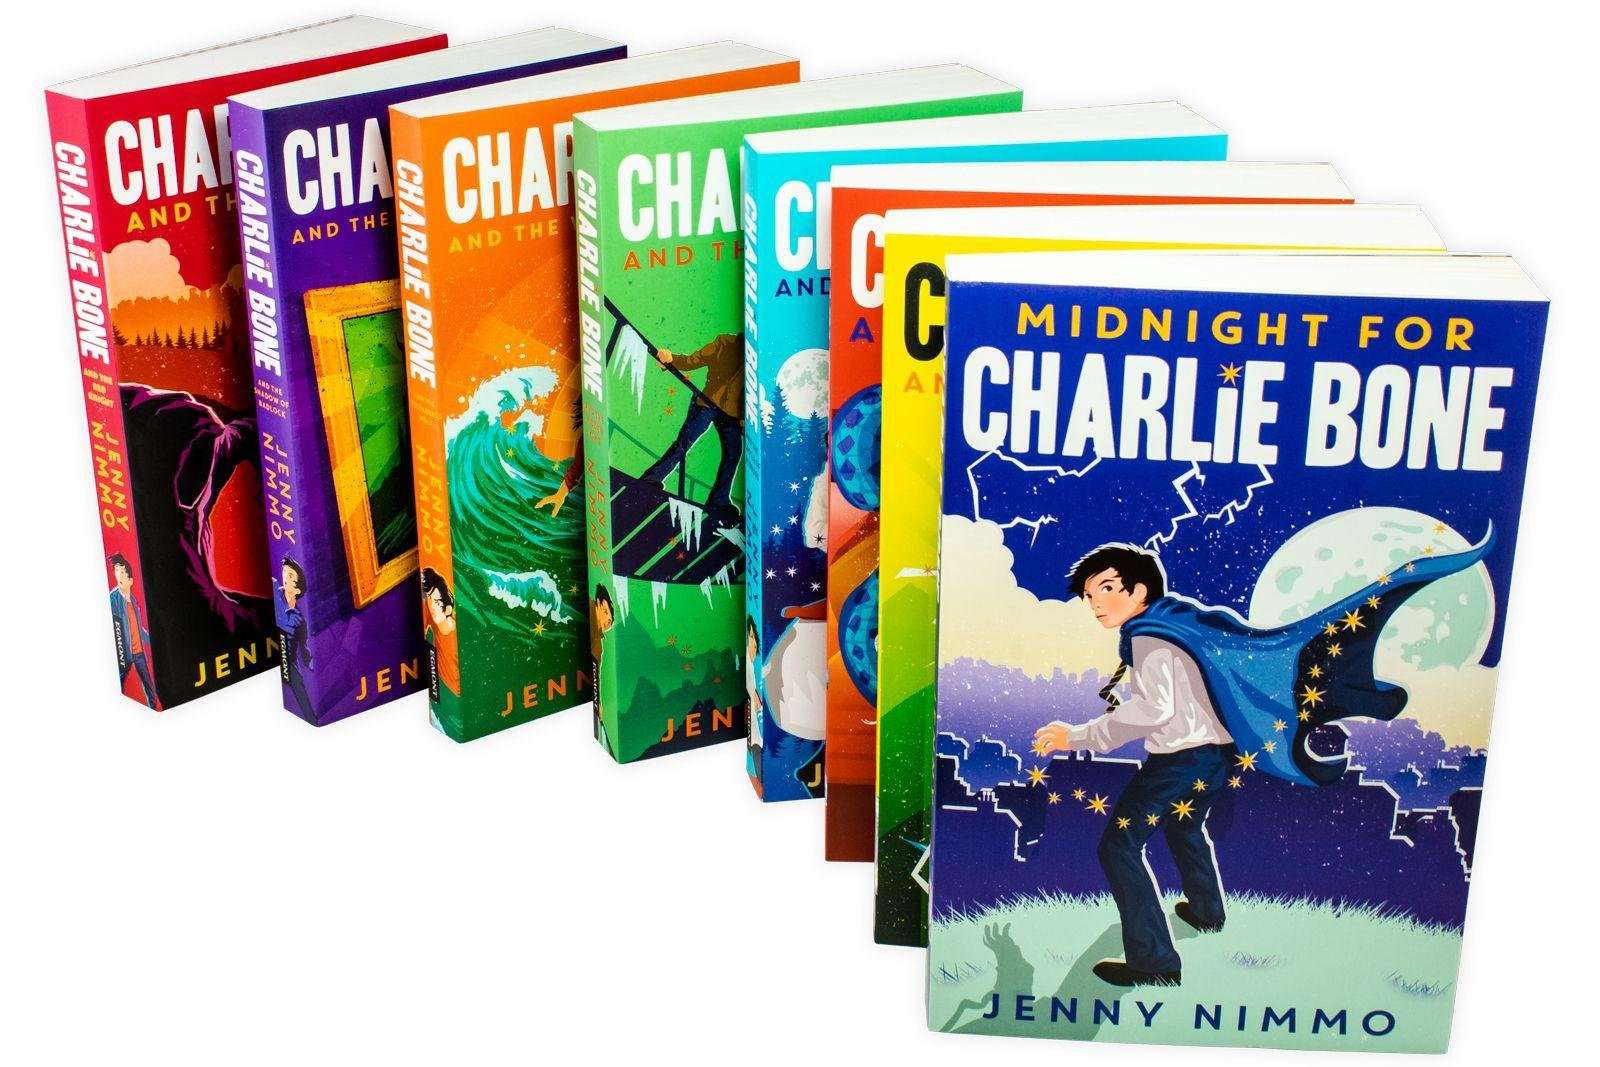 Charlie Bone 8 Books Midnight For Young Adult Collection Paperback By Jenny Nimmo - St Stephens Books